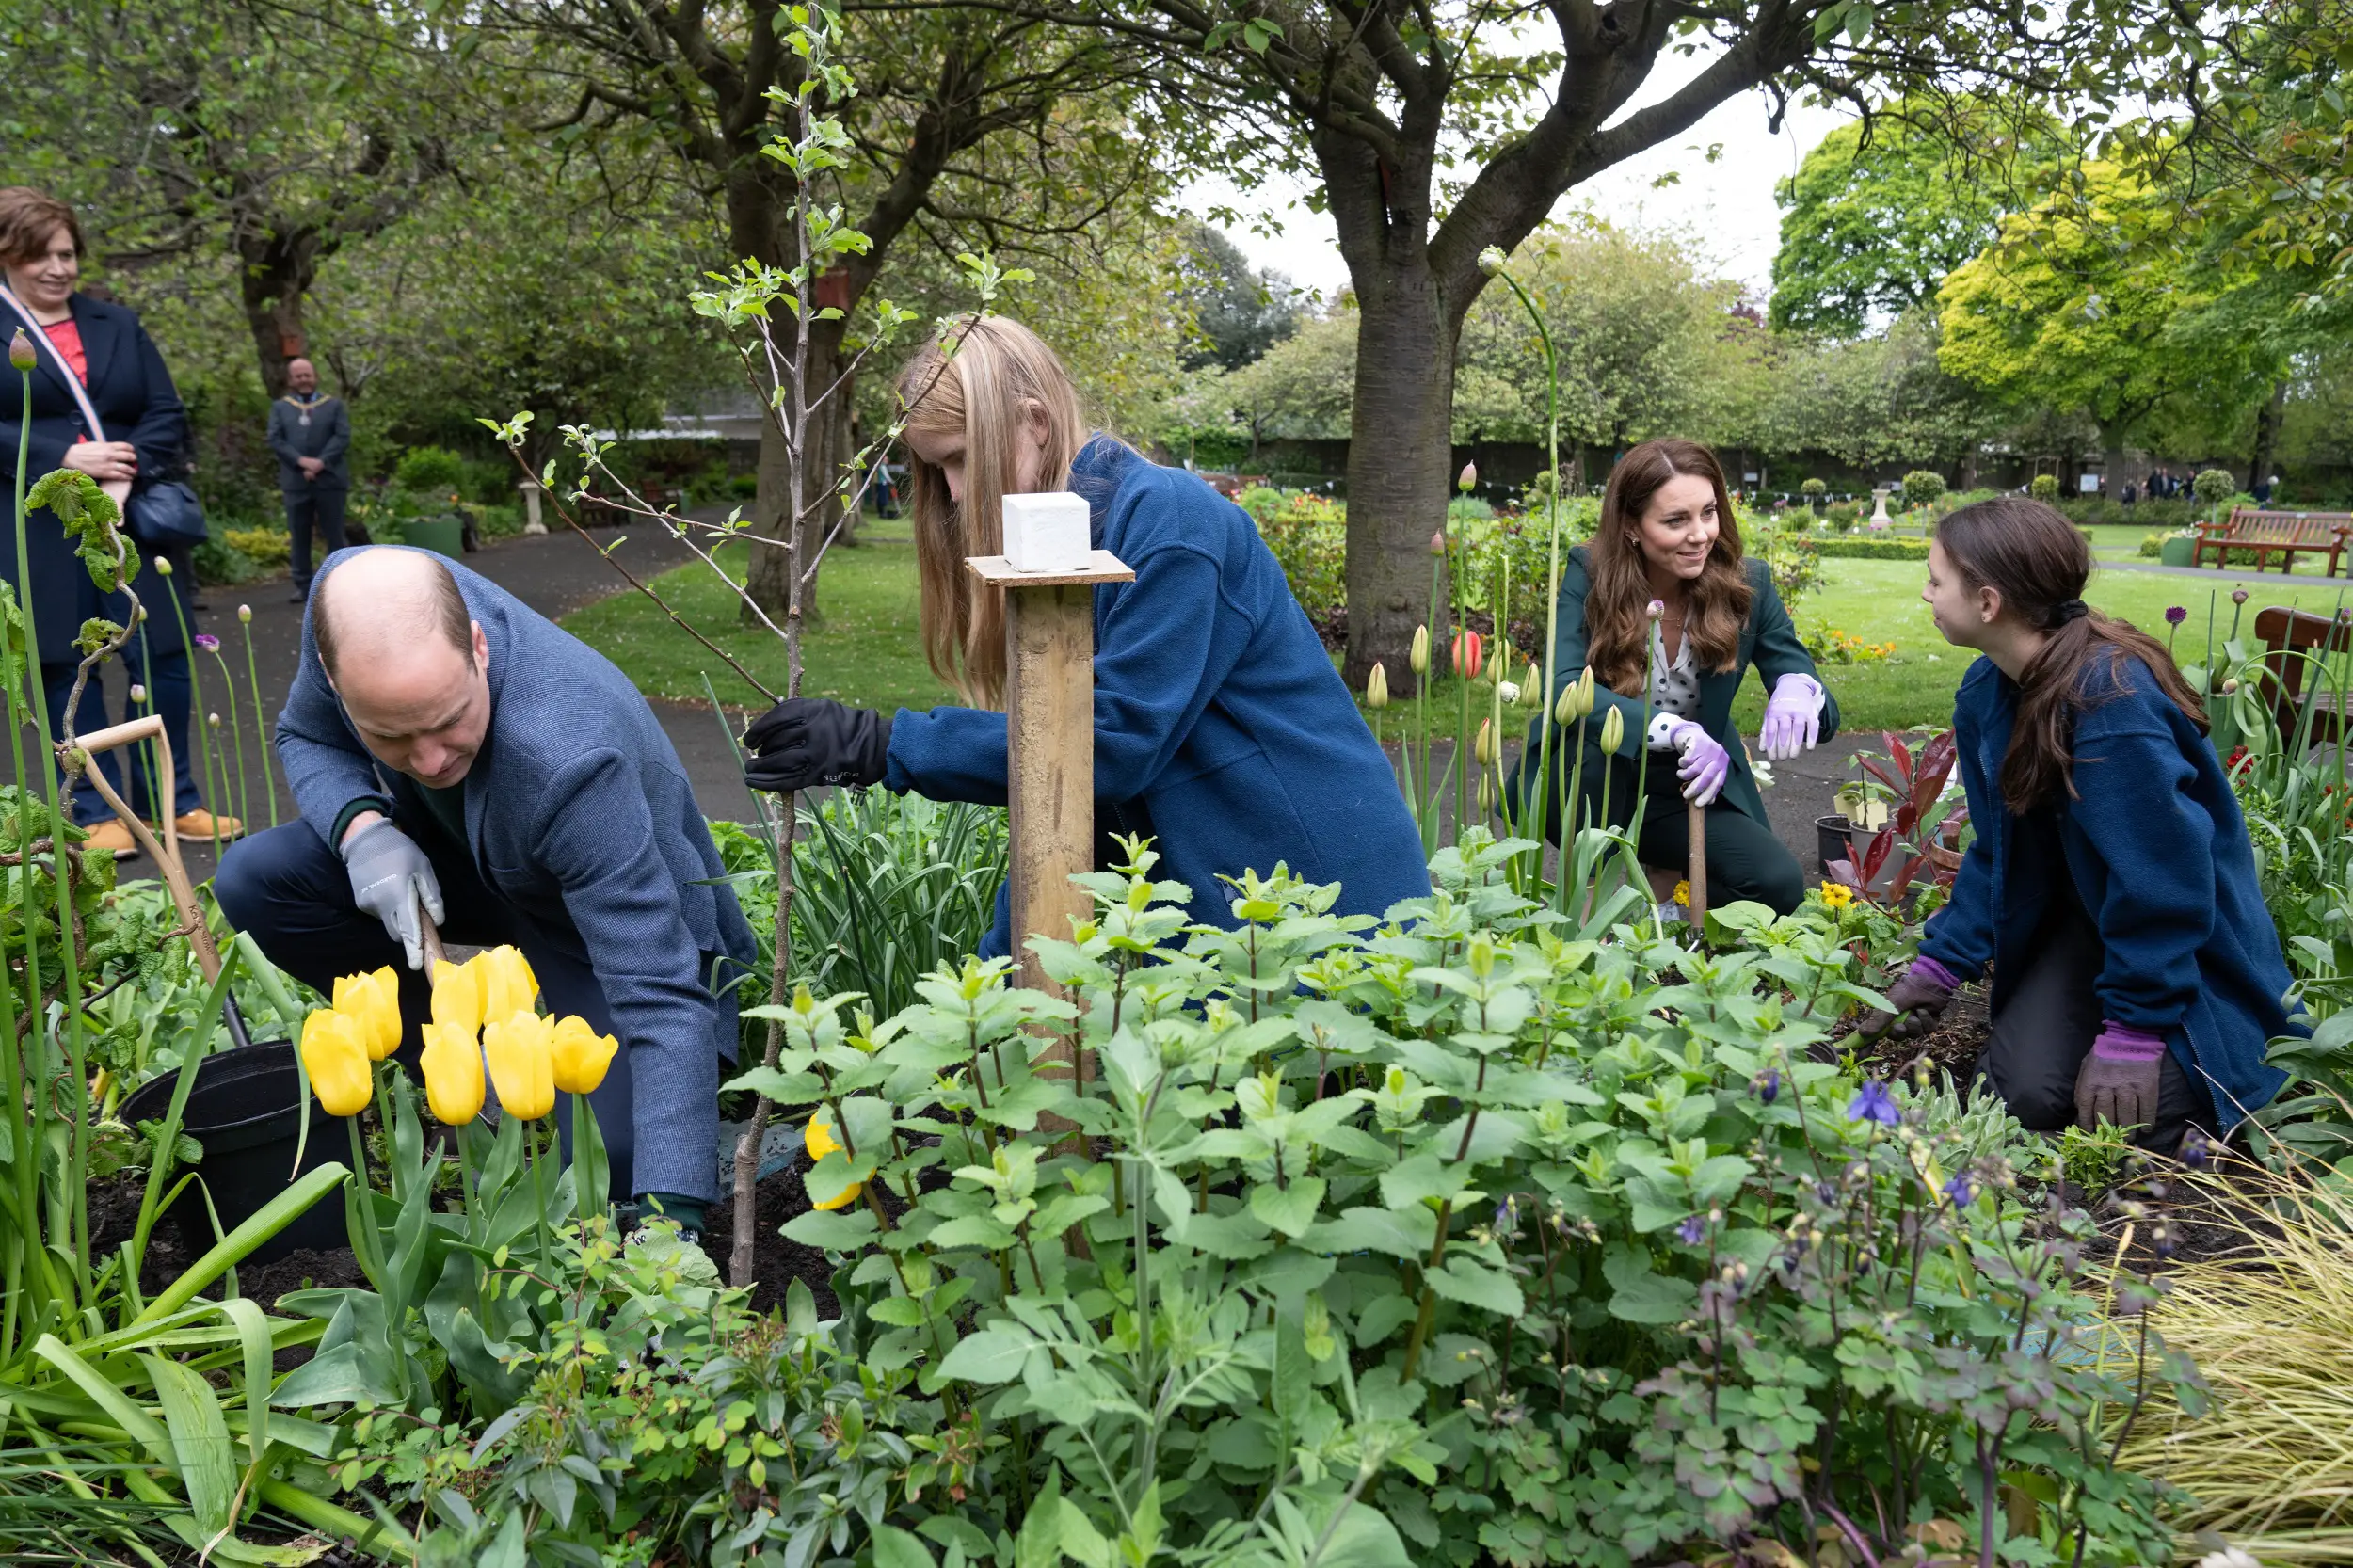 The Earl and Countess of Strathearn, William and Catherine's Scottish title, met with teenagers doing their Duke of Edinburgh’s bronze award and helped to plant sunflowers.